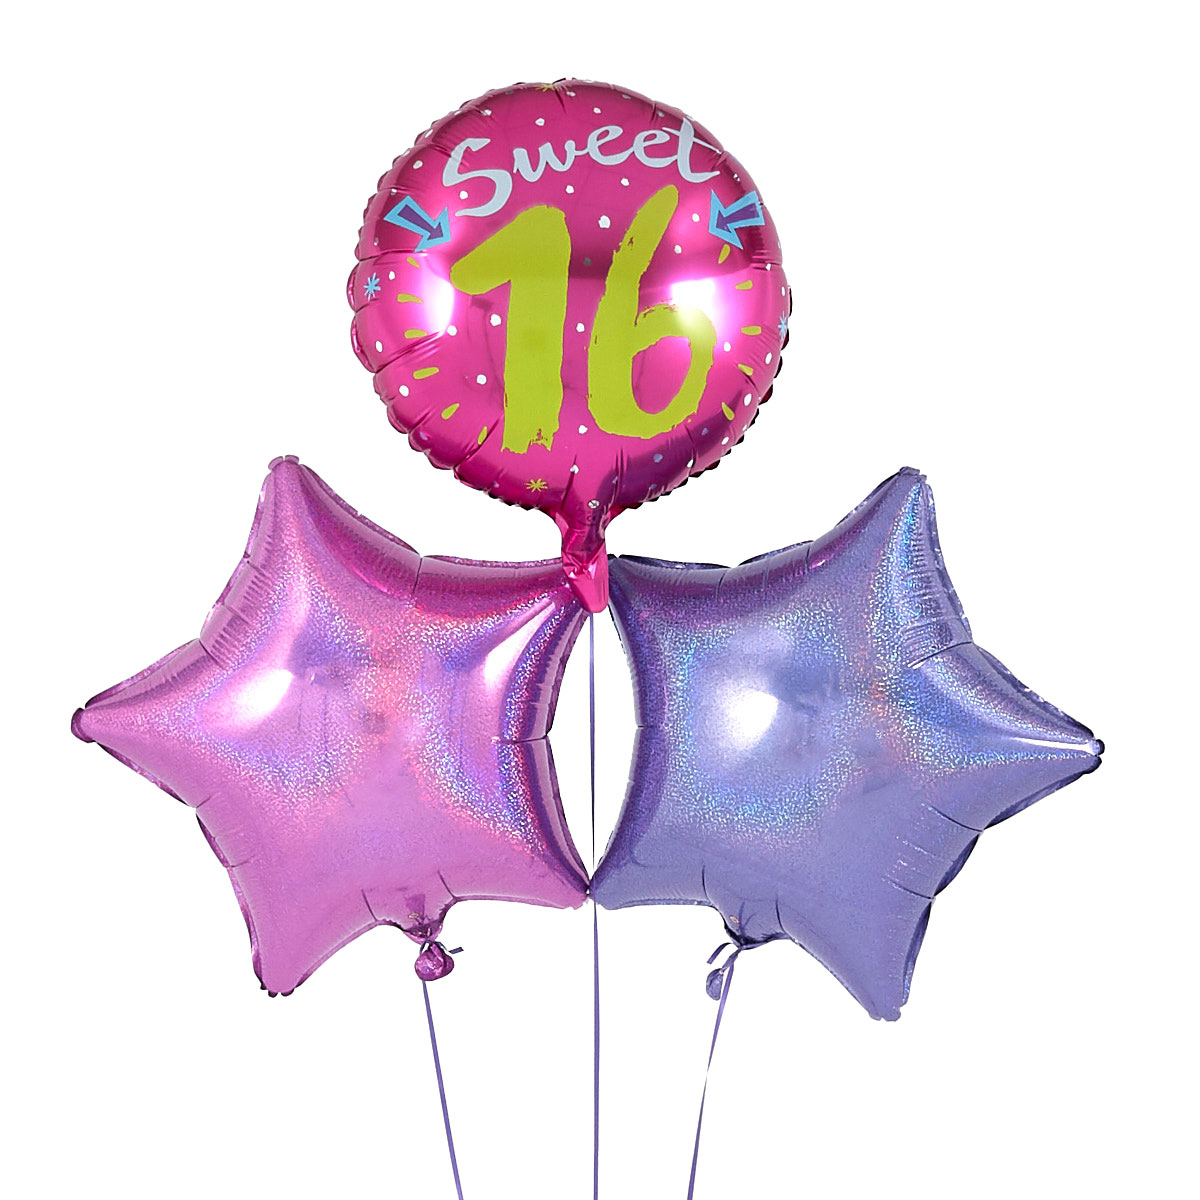 Sweet 16th Birthday Pink Balloon Bouquet - DELIVERED INFLATED!